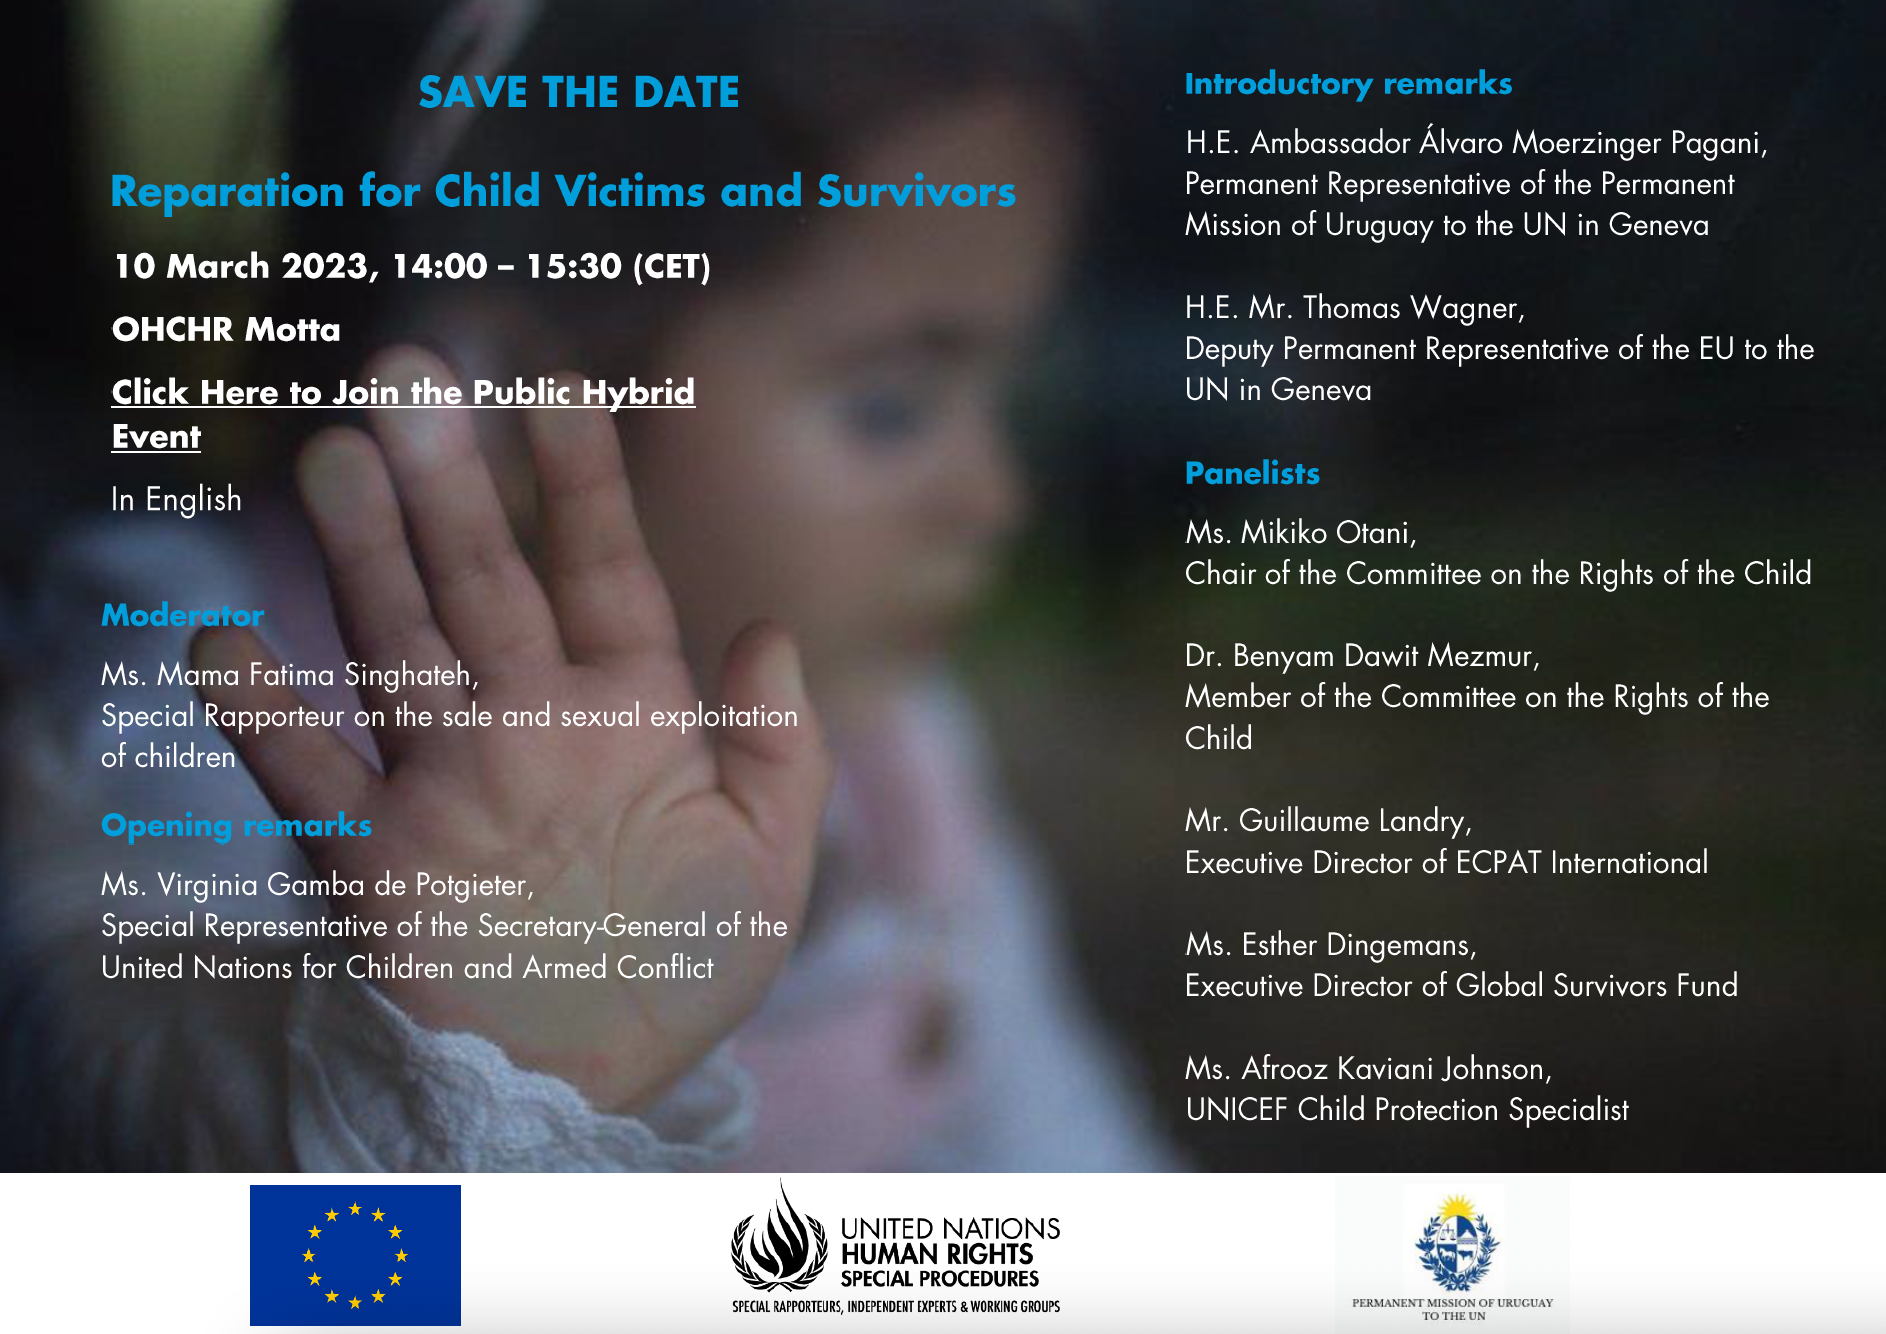 Report of the Side-Event organized by the UN Human Rights Special Procedures on Reparation for Child Victim and Survivors of Sale and Sexual Exploitation